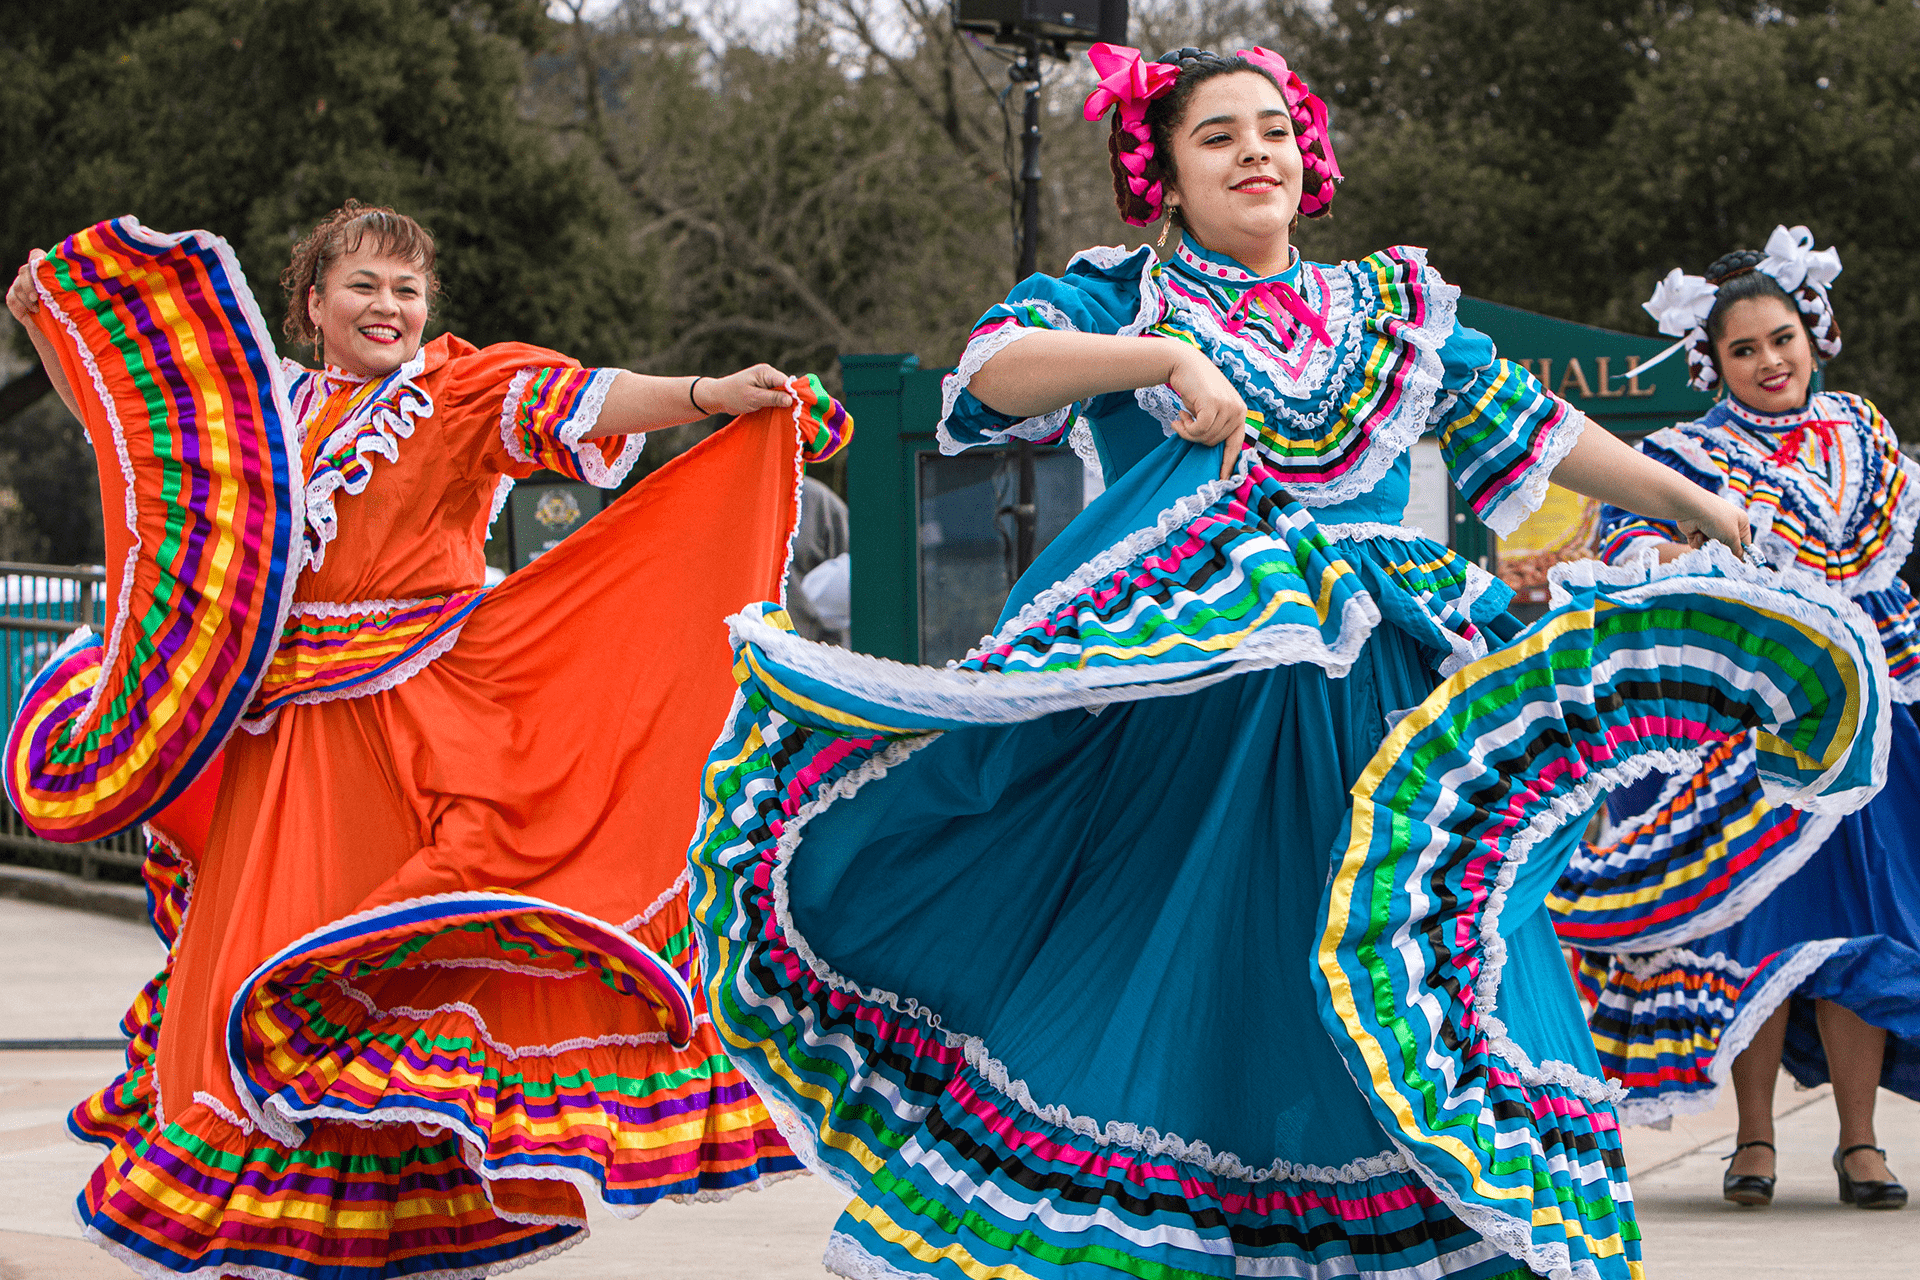 Image of Folkloric Dancers in traditional costume dancing in front of Atascadero City Hall - Photo by Keith Bergher